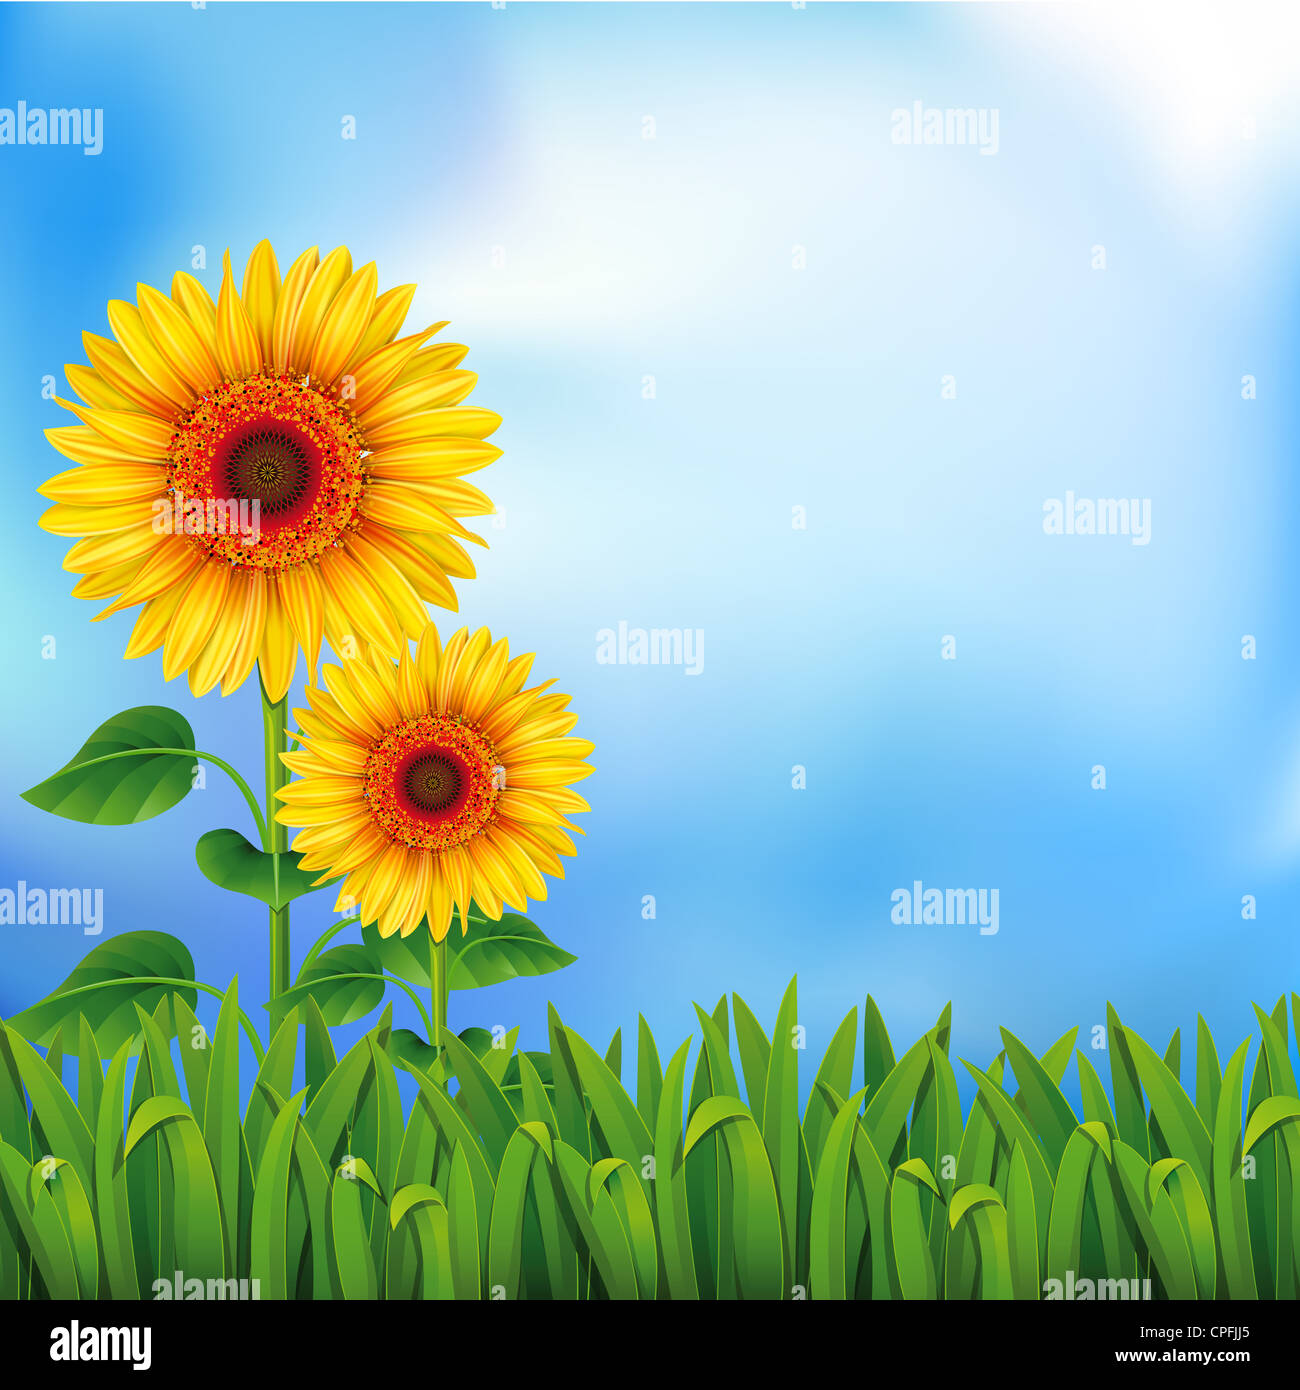 Two yellow sunflowers on the blue background Stock Photo